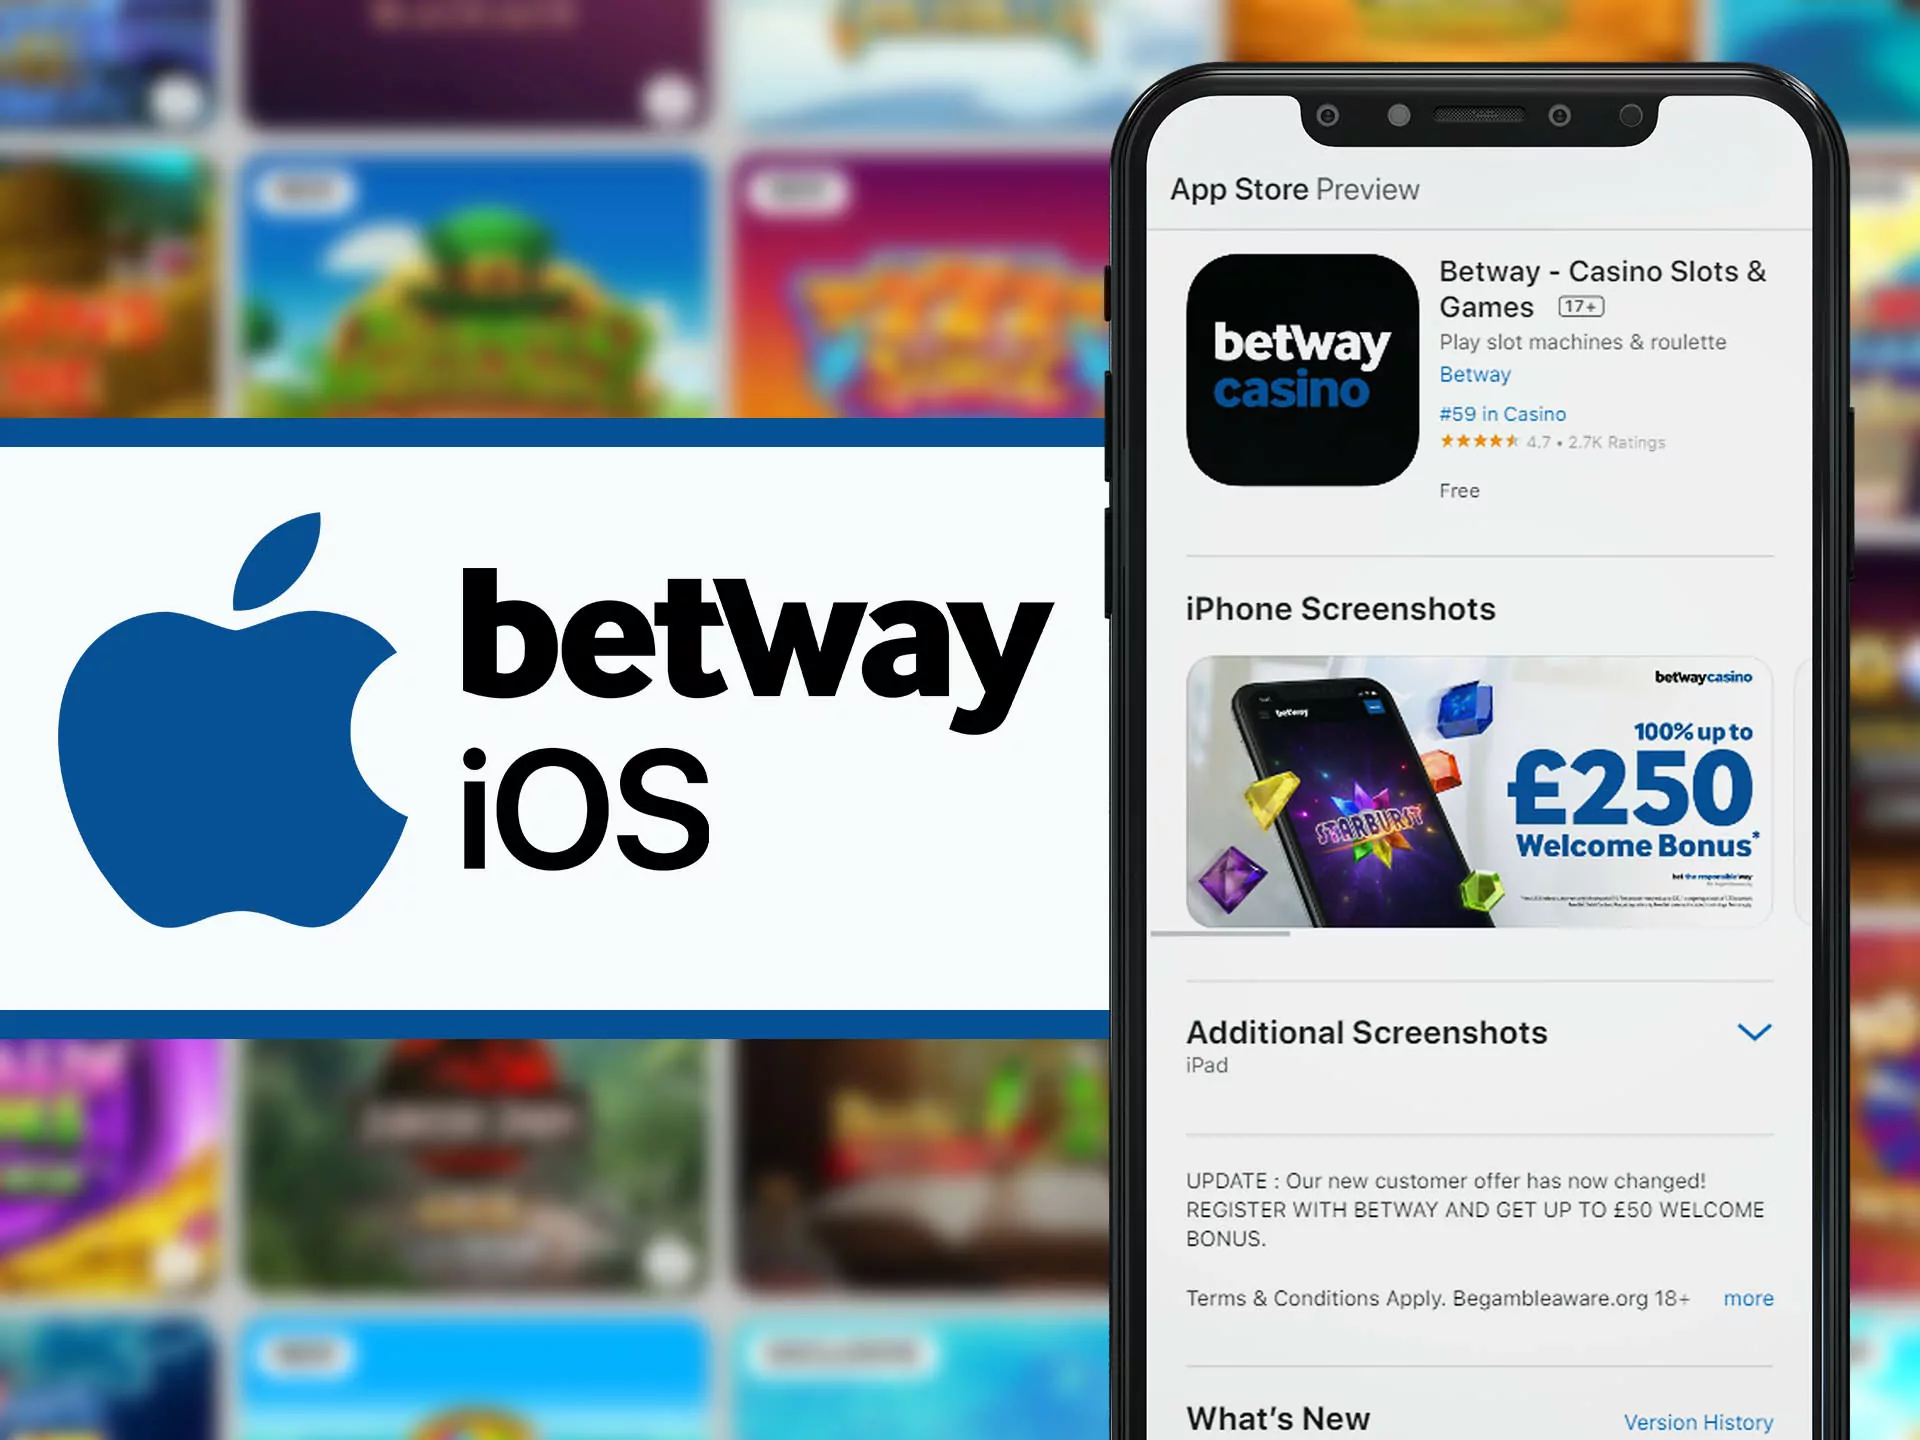 Download Betway app on your phone from app store.